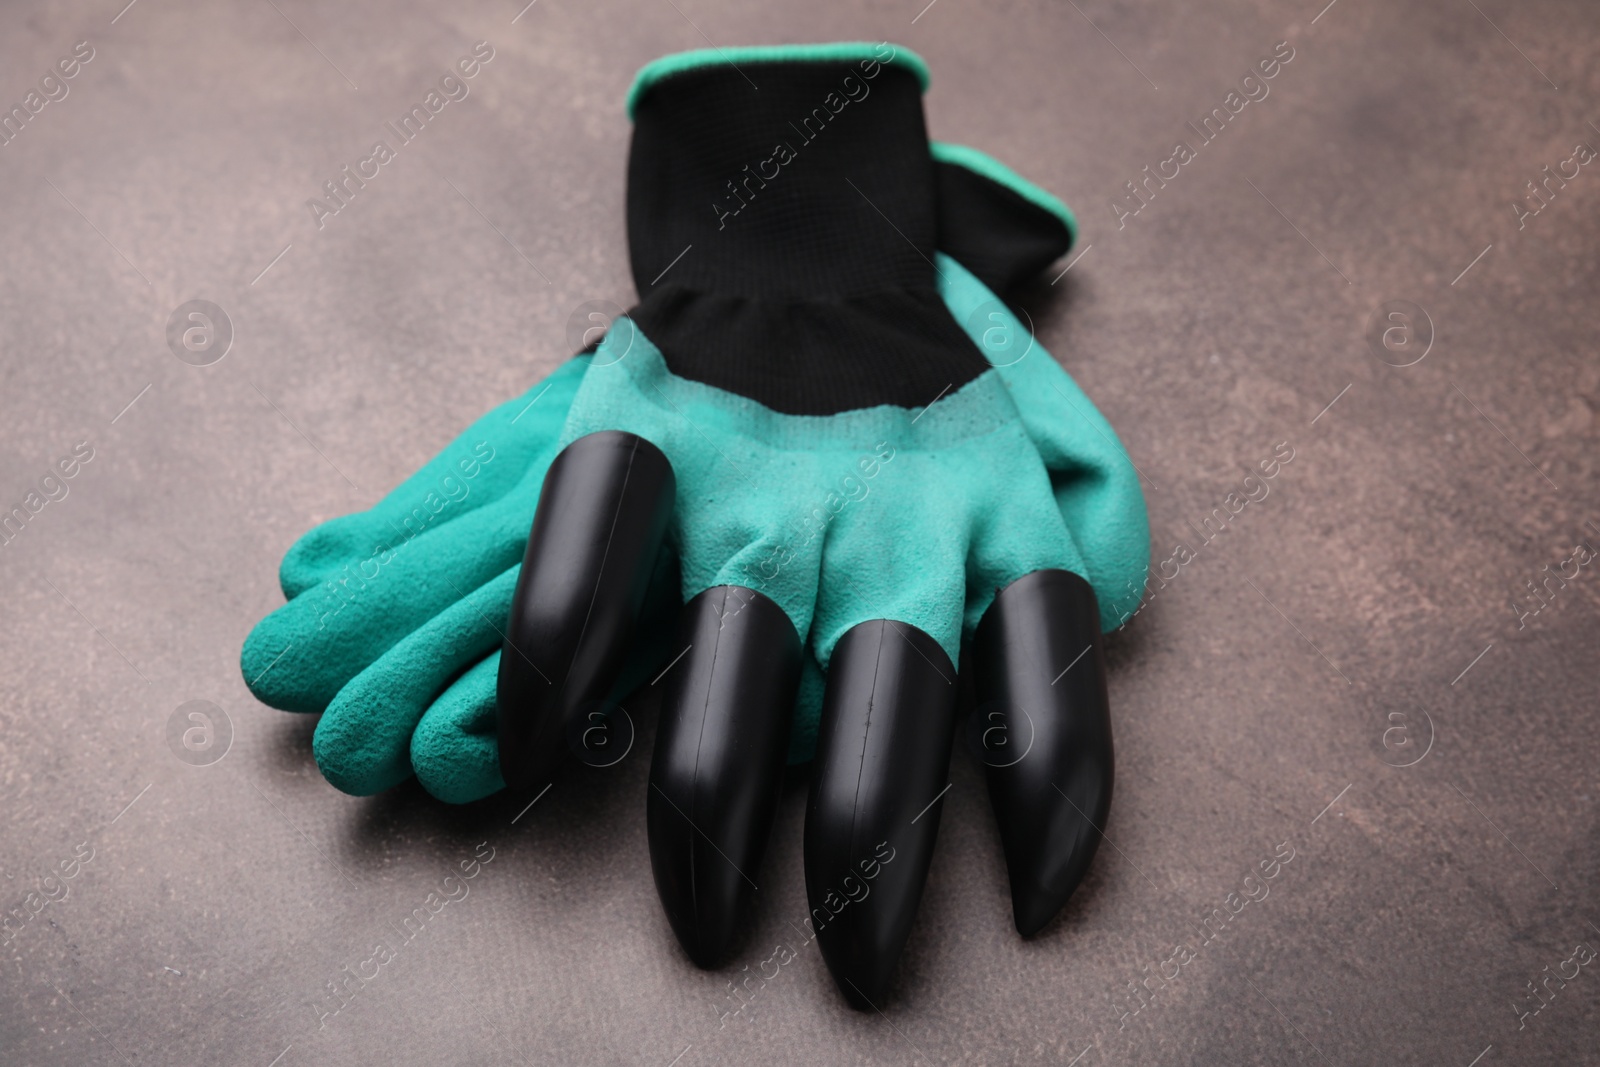 Photo of Pair of claw gardening gloves on brown textured table